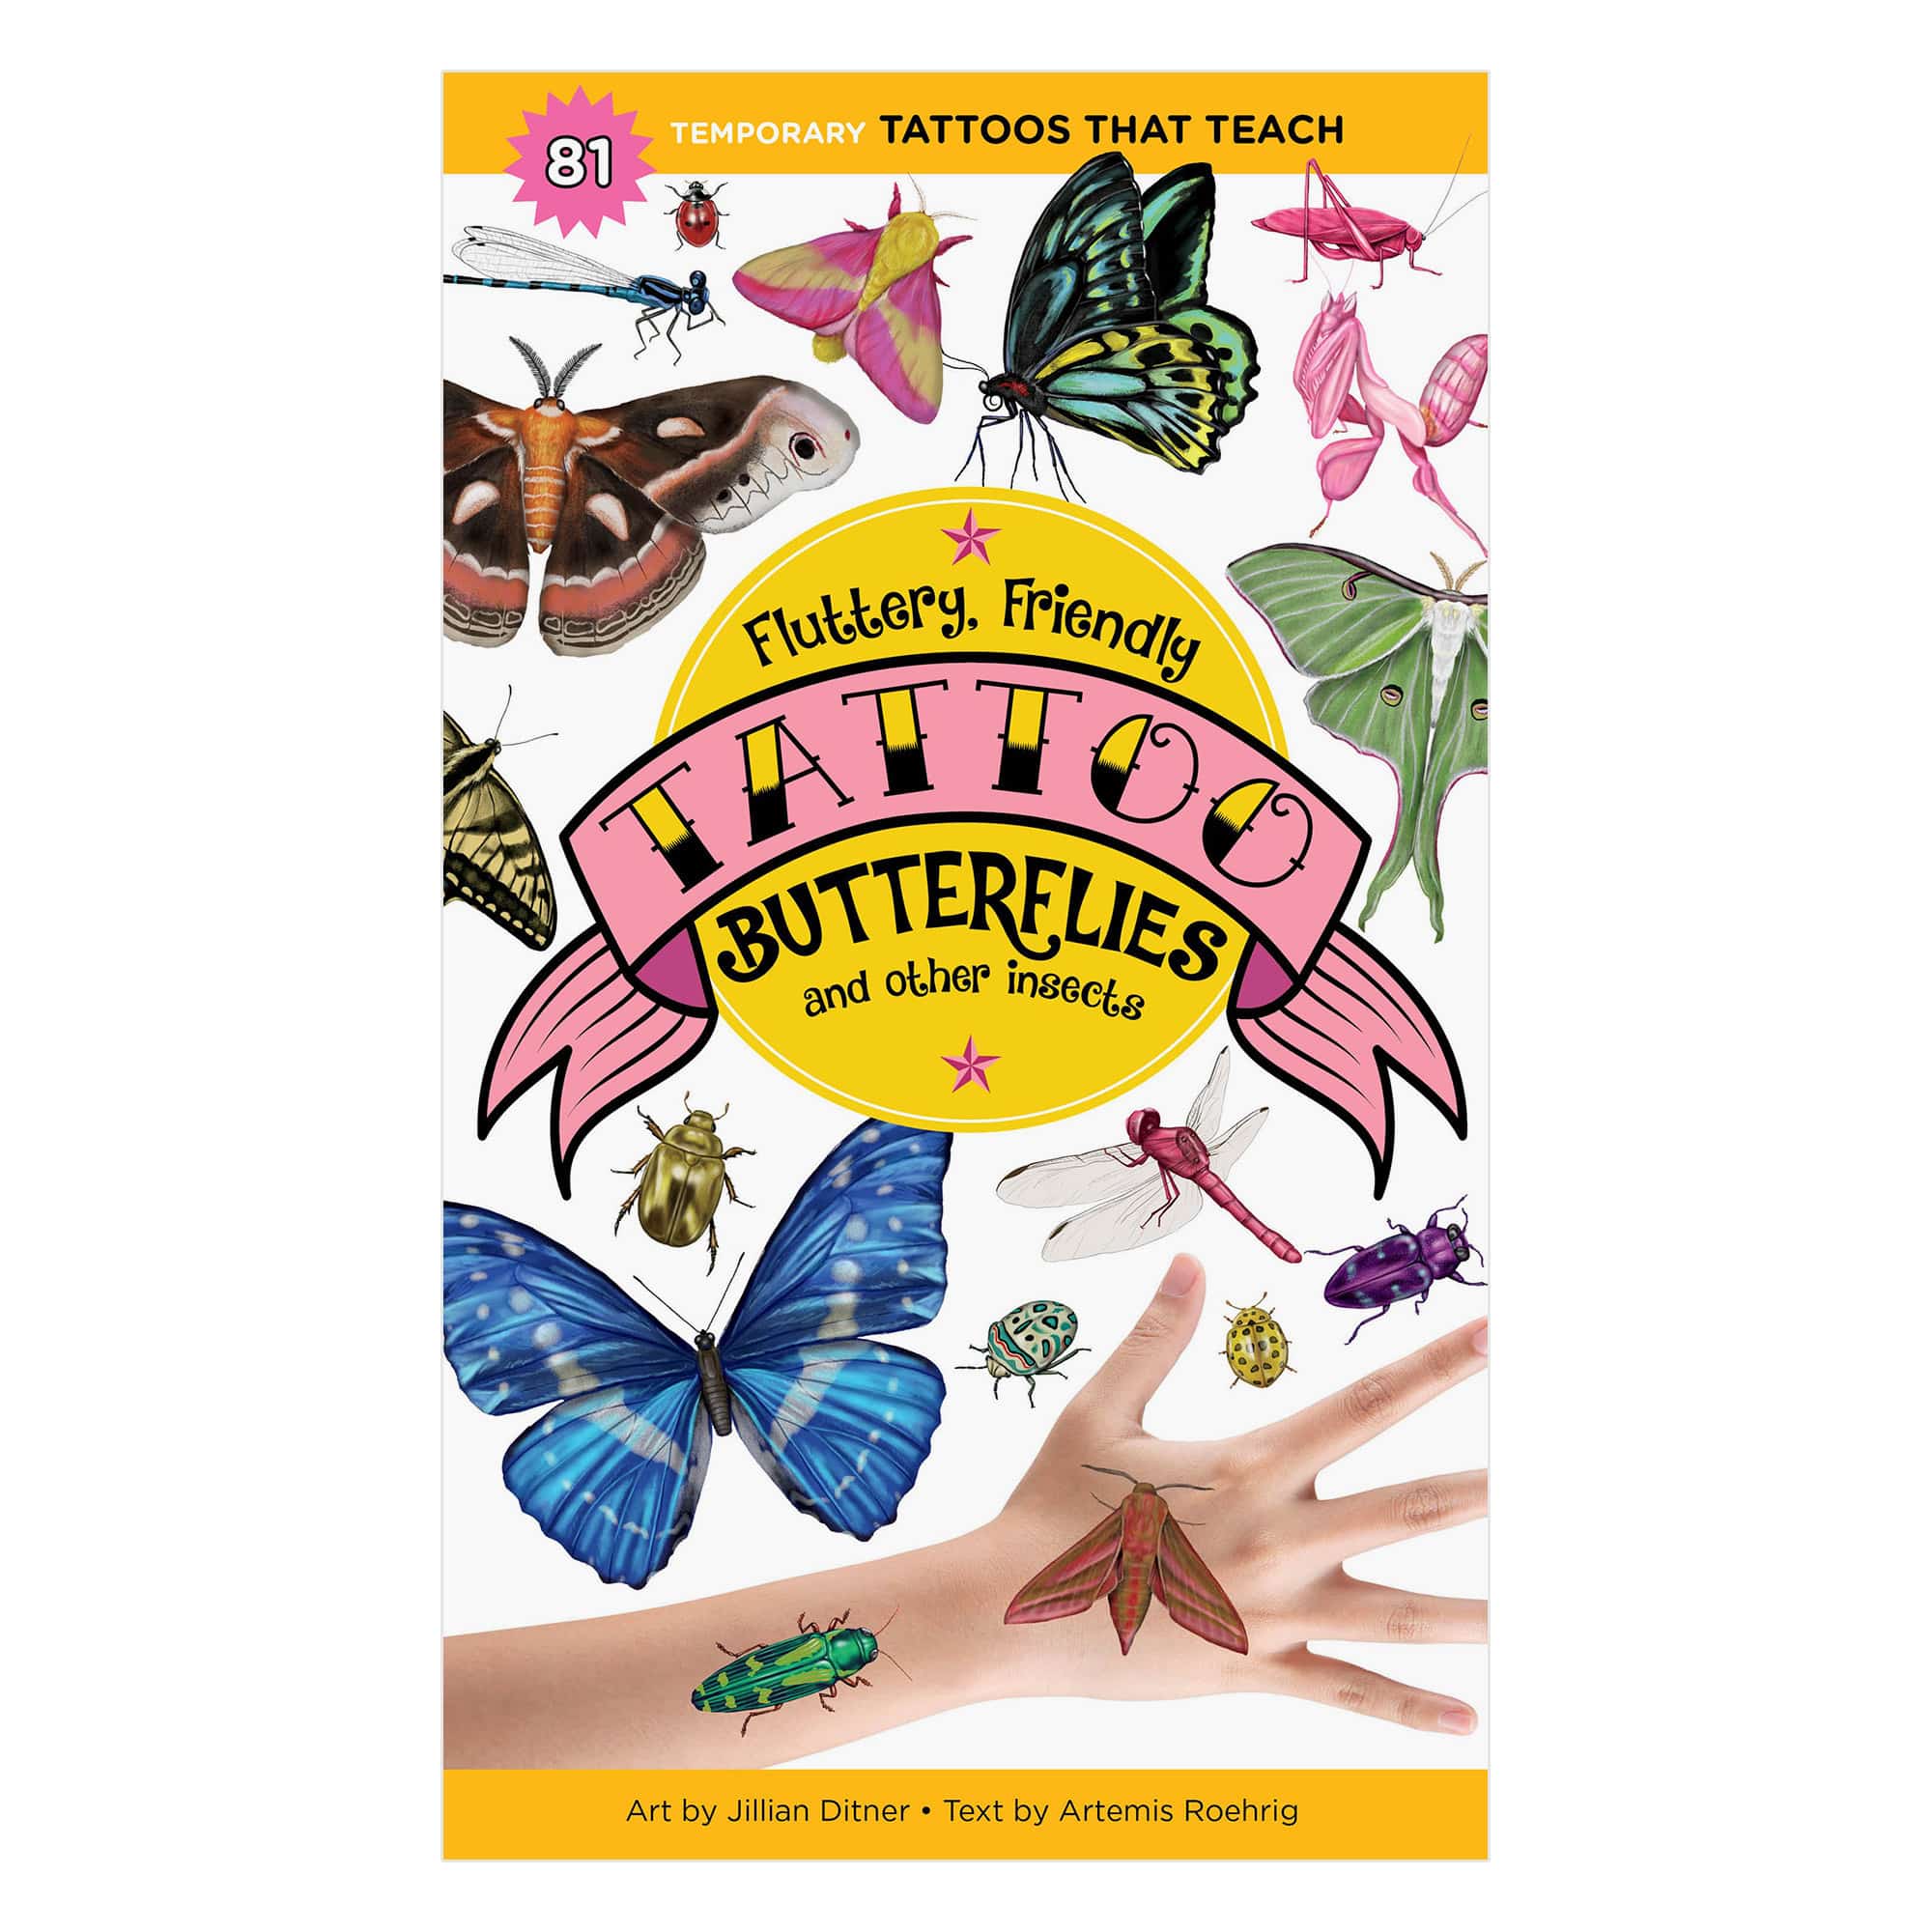 Fluttery, Friendly Tattoo - Butterflies & Other Insects